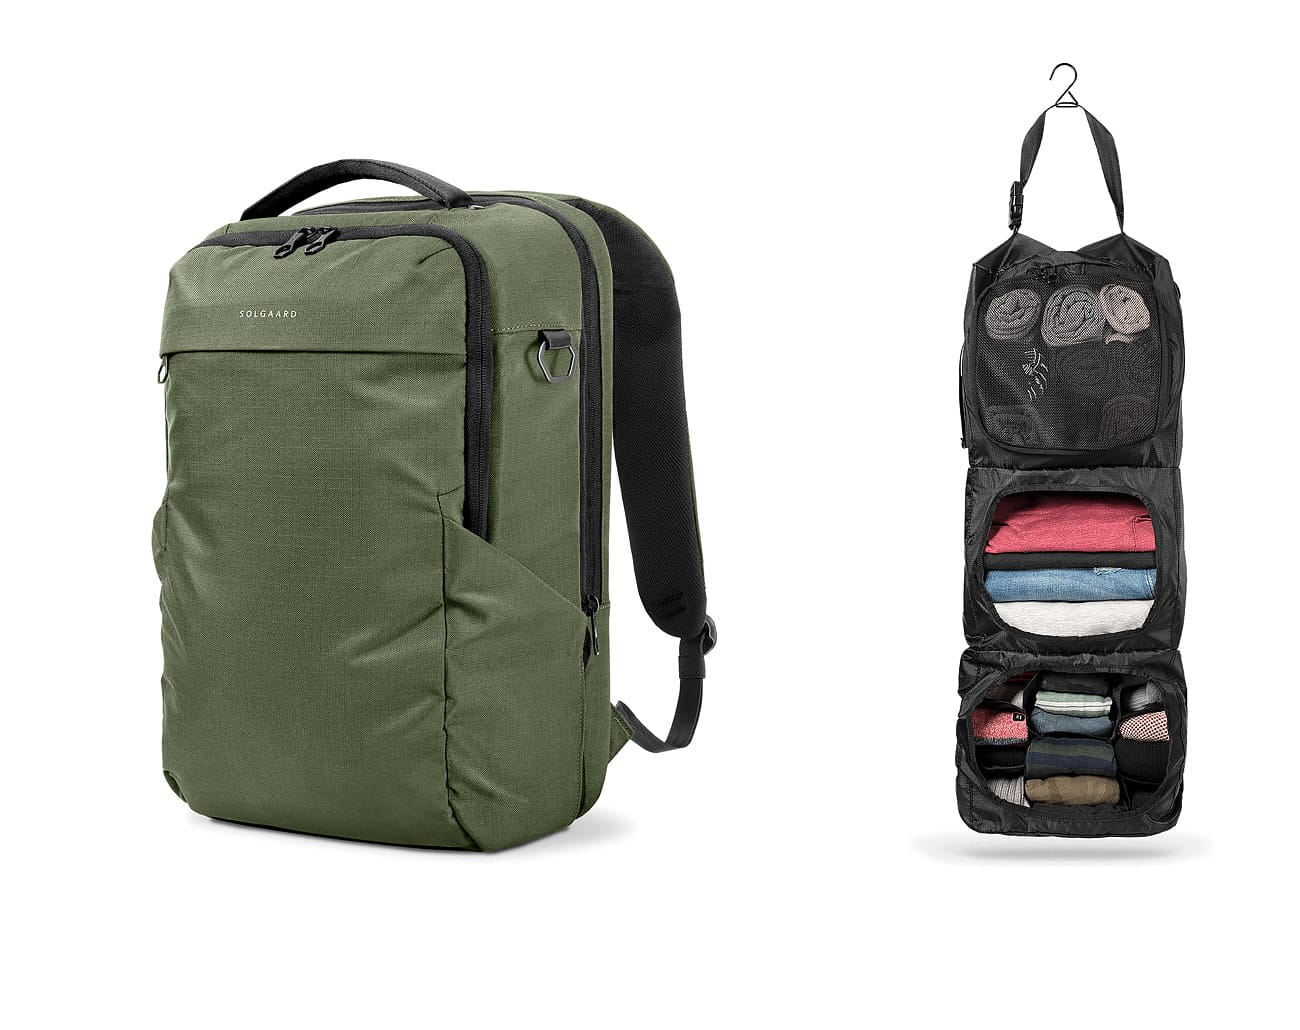 Travel backpack with closet